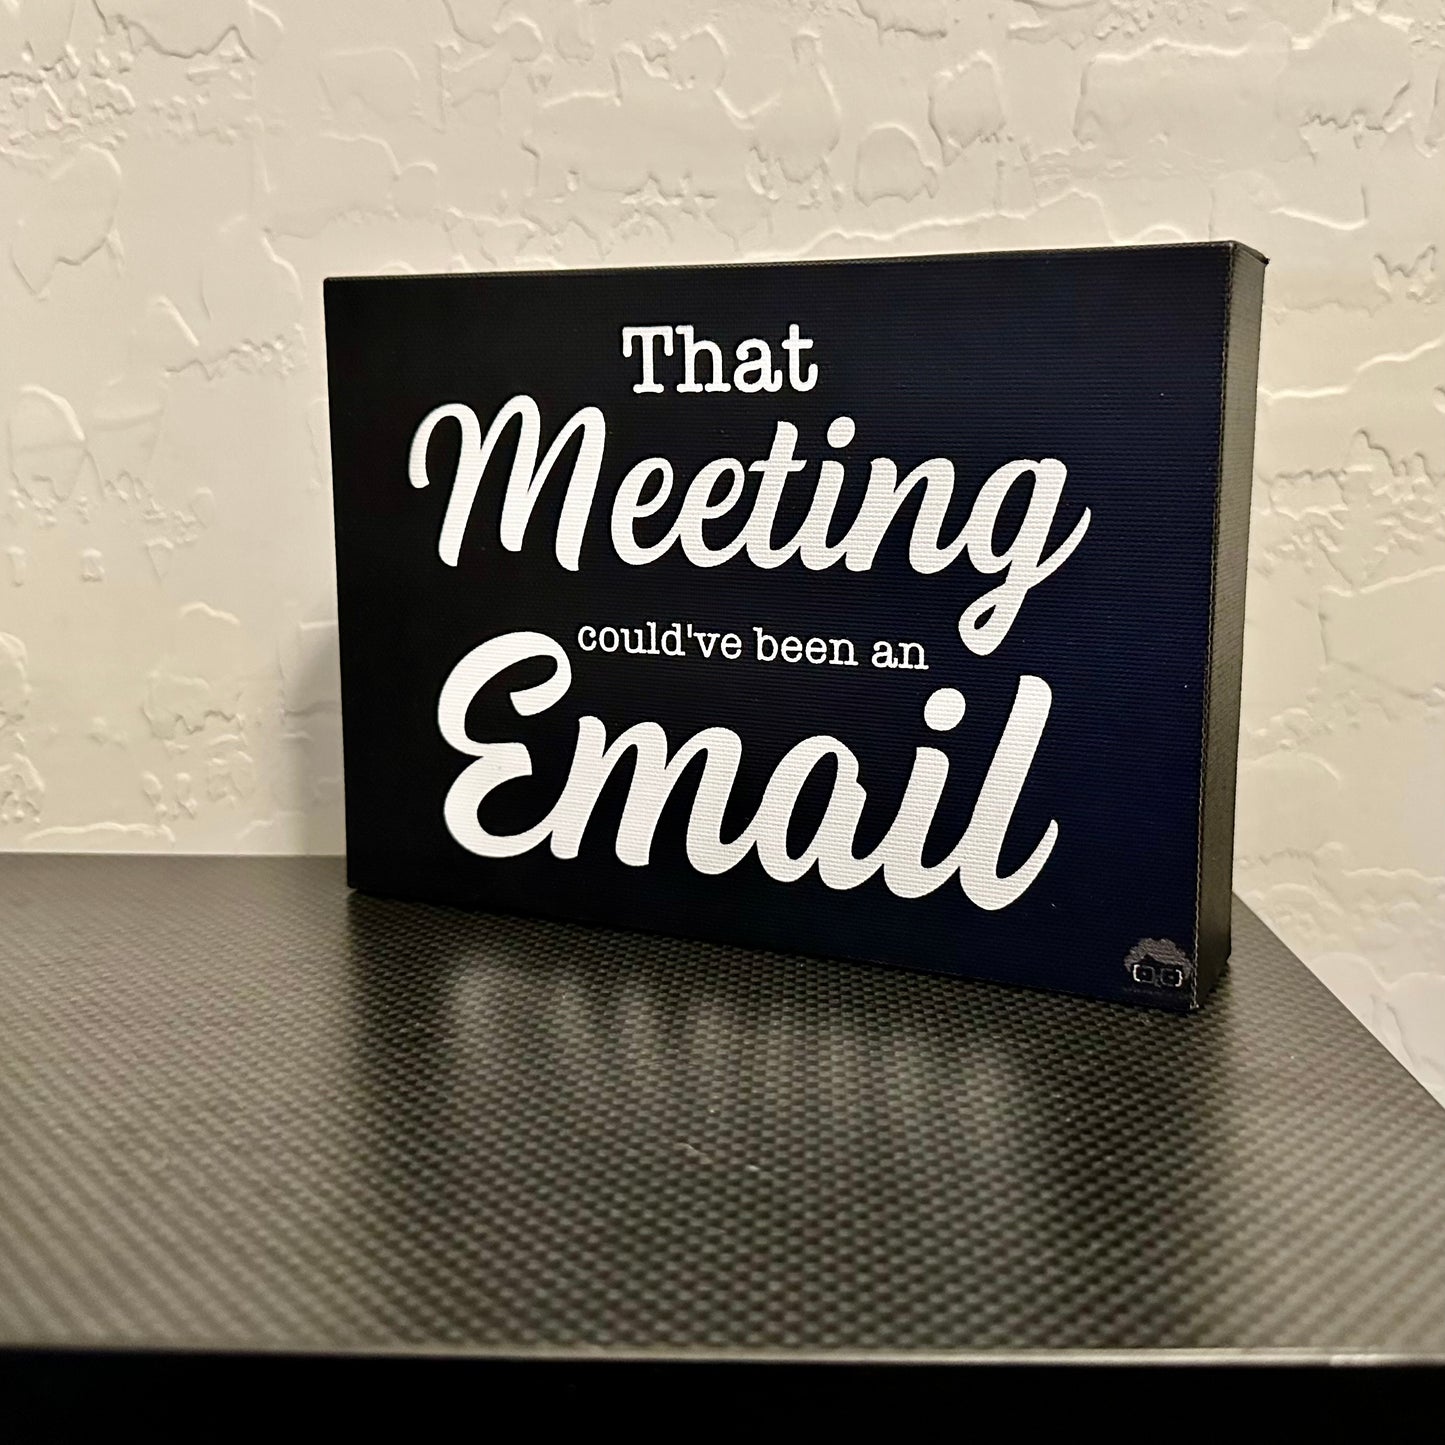 That Meeting could've been an Email - 5 x 7 inch Canvas Wrapped Sign - Black